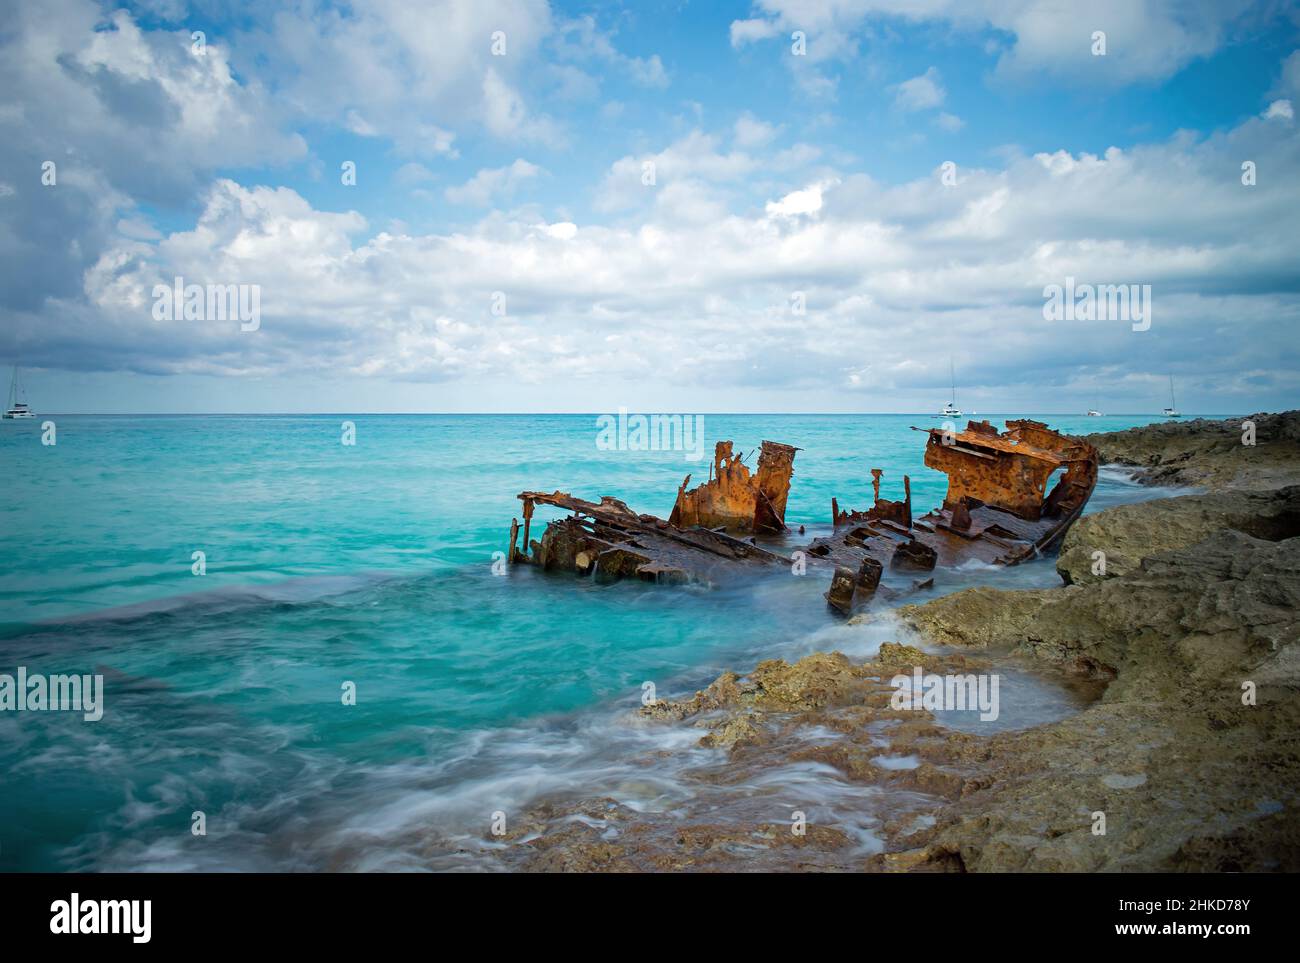 A rusting shipwreck of the Gallant Lady in the beautiful clear blue waters around North Bimini, Bahamas. Sailing boats are anchored in the distance. Stock Photo